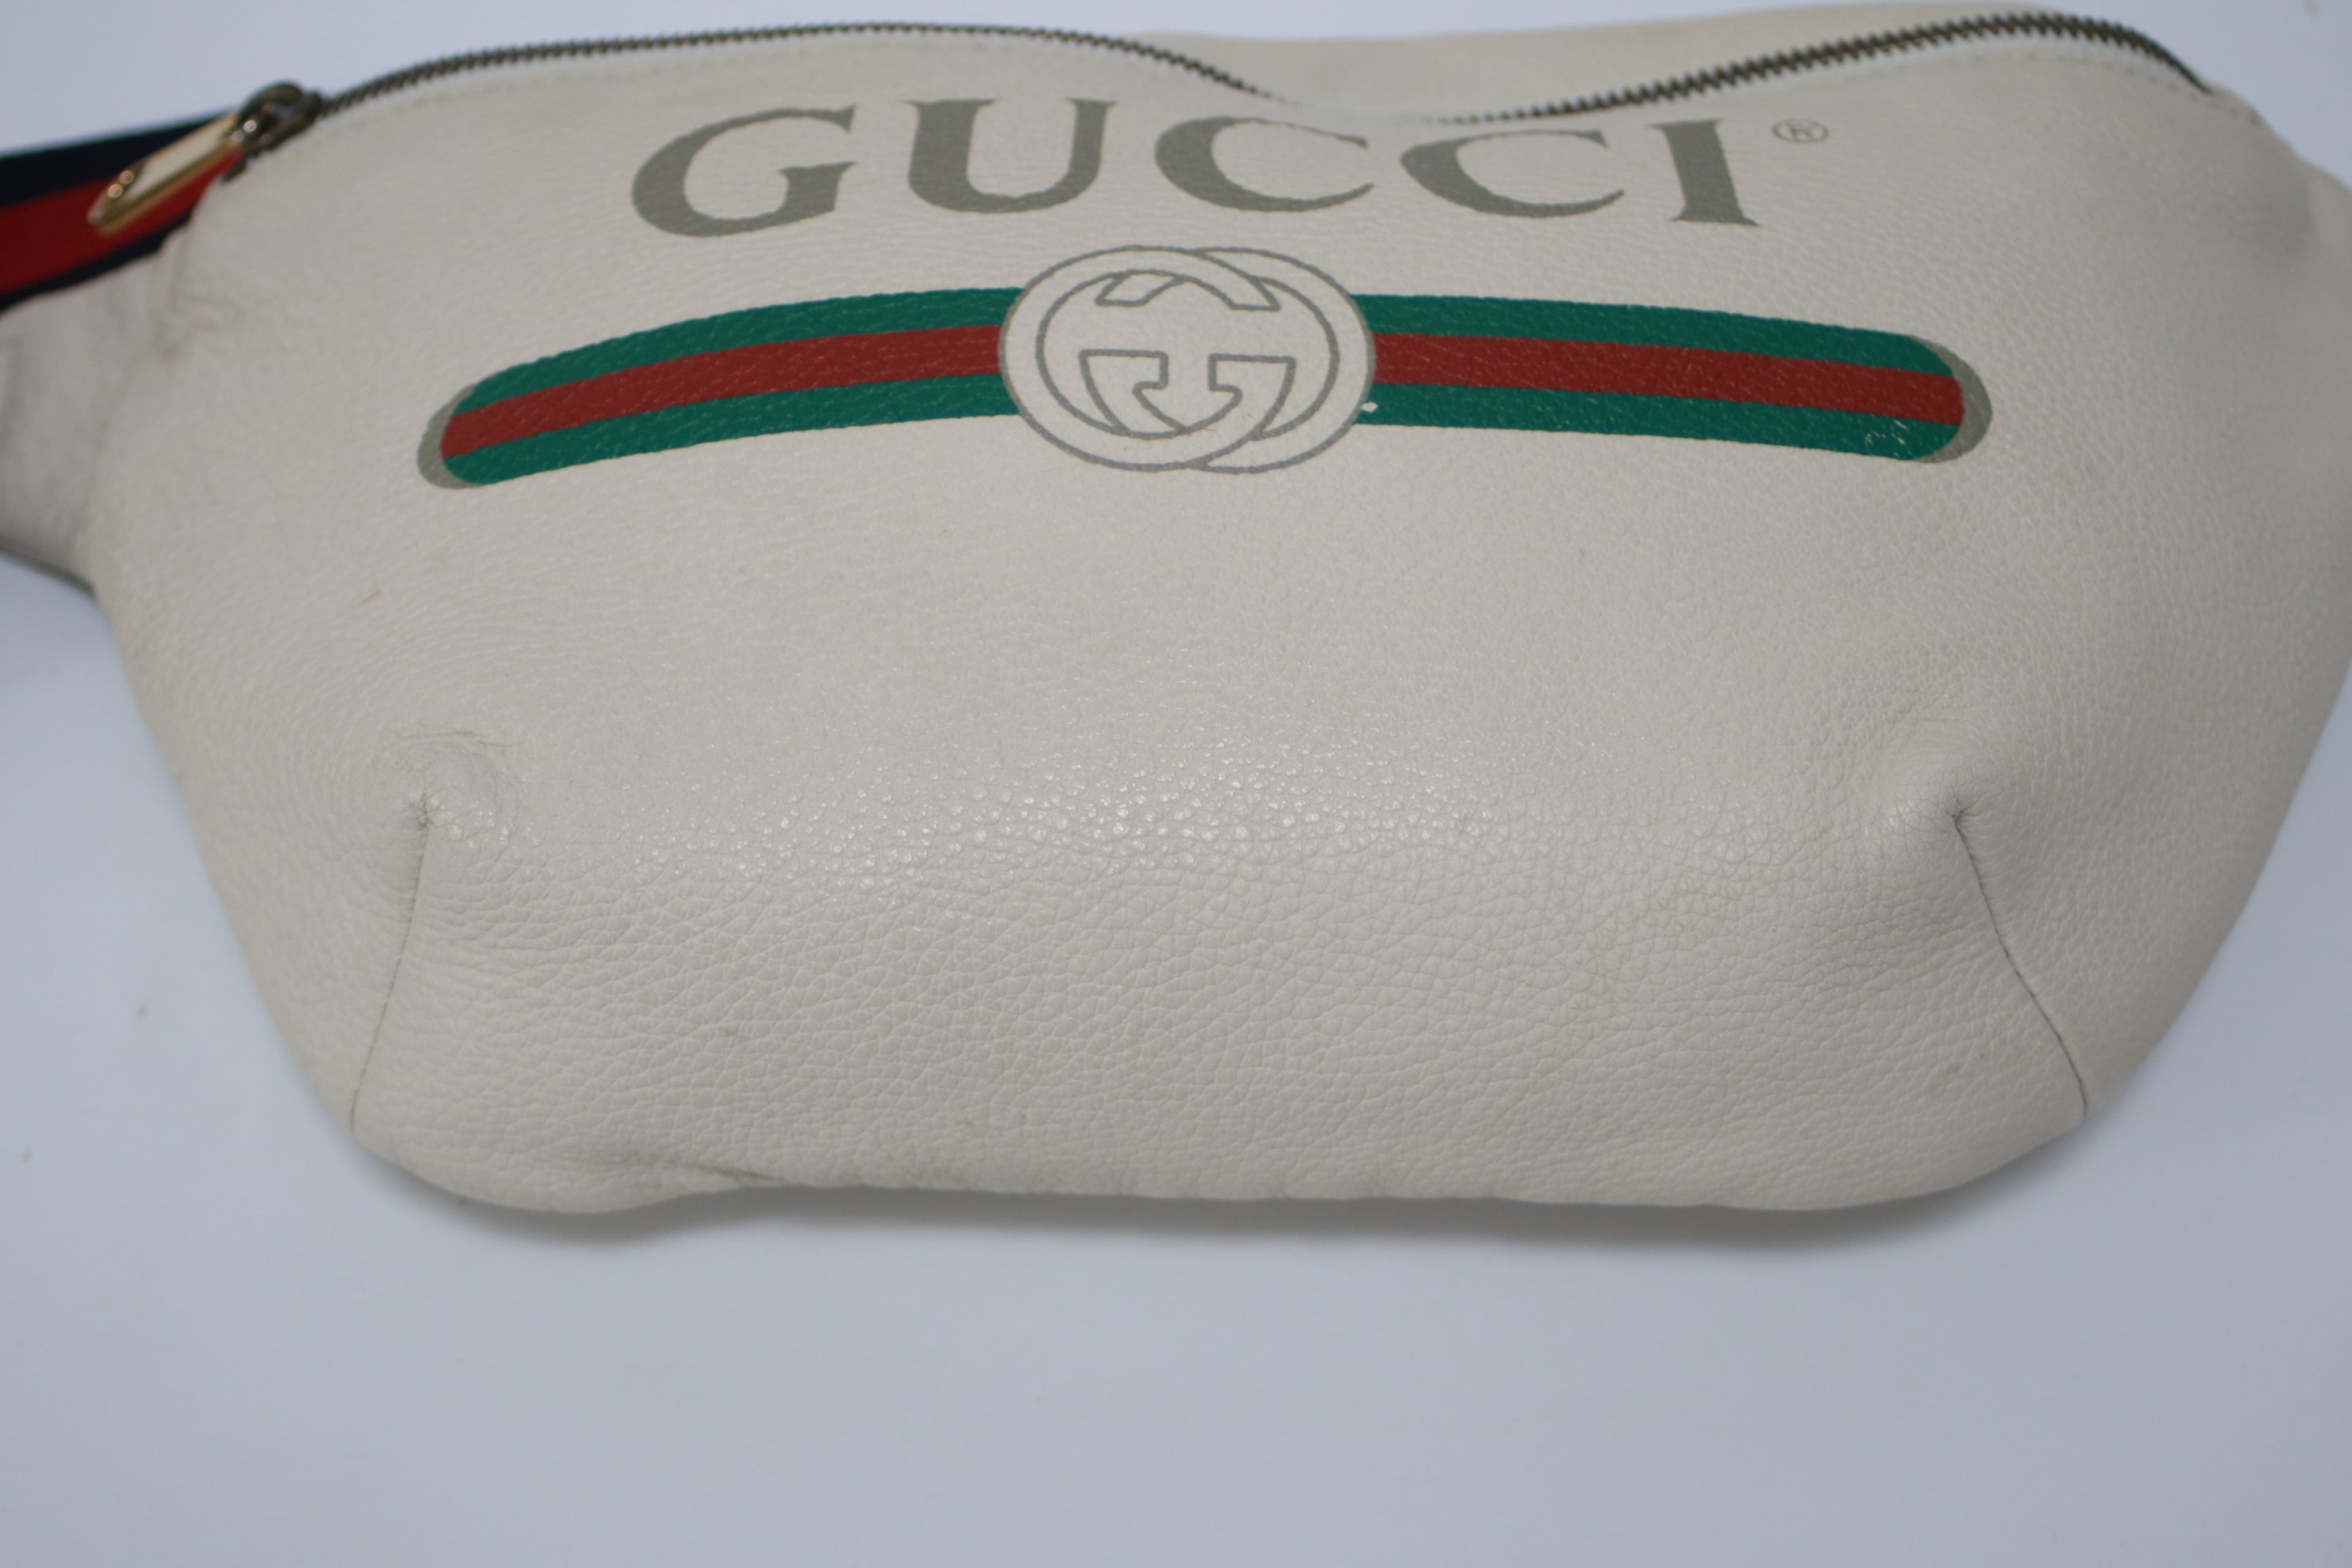 Gucci Leather Beltbag Used (8079)